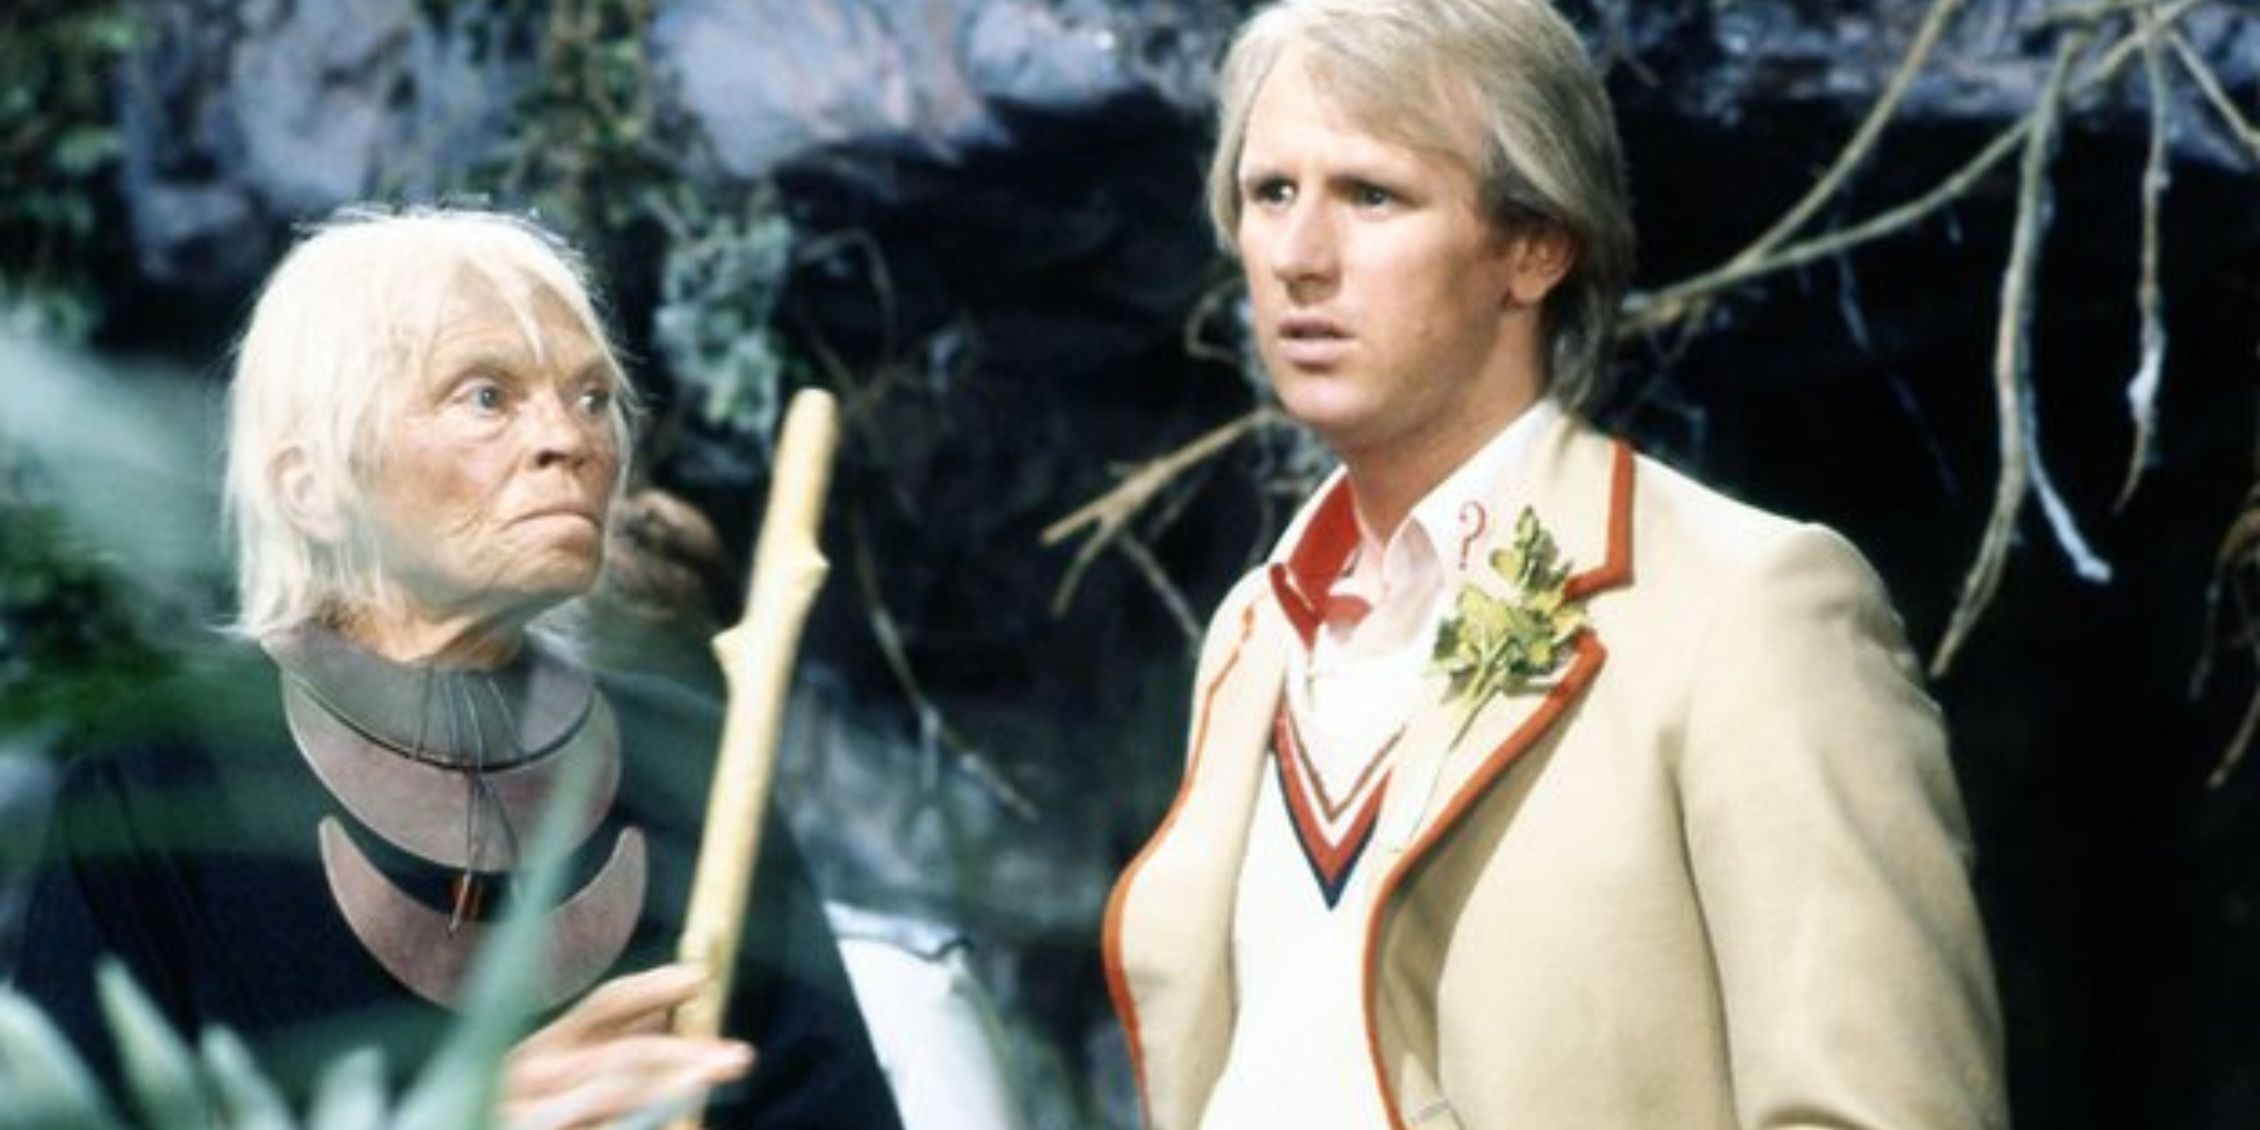 Peter Davison's Doctor standing next to an older woman holding a stick on Doctor Who